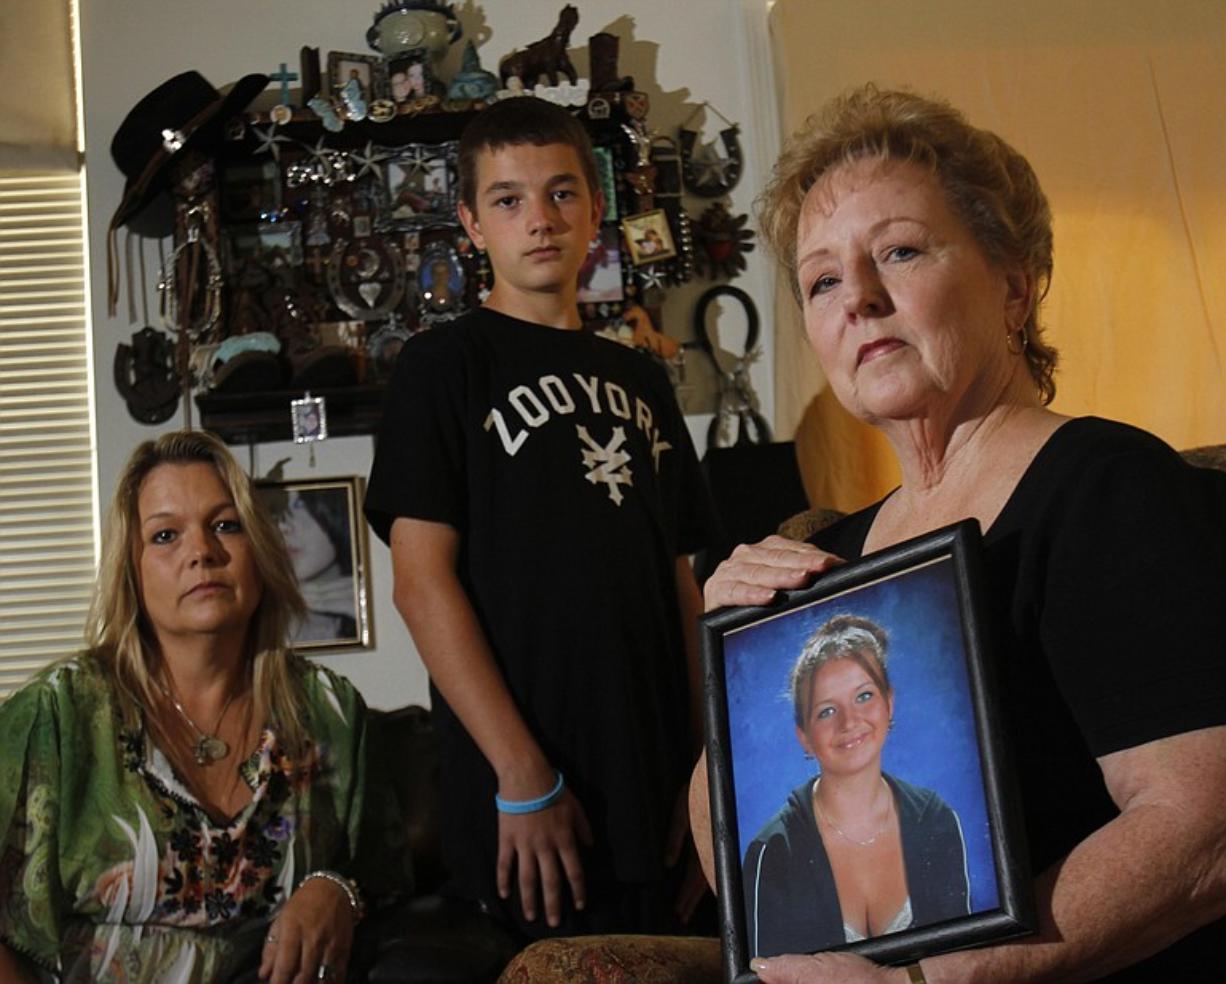 Sylvia Johnson, right, grandmother of a Vancouver teenager murdered  in 2005 by a man whose earlier third-strike life sentence had been rescinded, holds a photo of Chelsea Harrison at her home in in Foothill Ranch, Calif. The family, including Chelsea's brother, Chris Harrison, 15, and her mother, Stephanie Johnson, left, keep a shrine of Chelsea's awards and pictures on the wall.